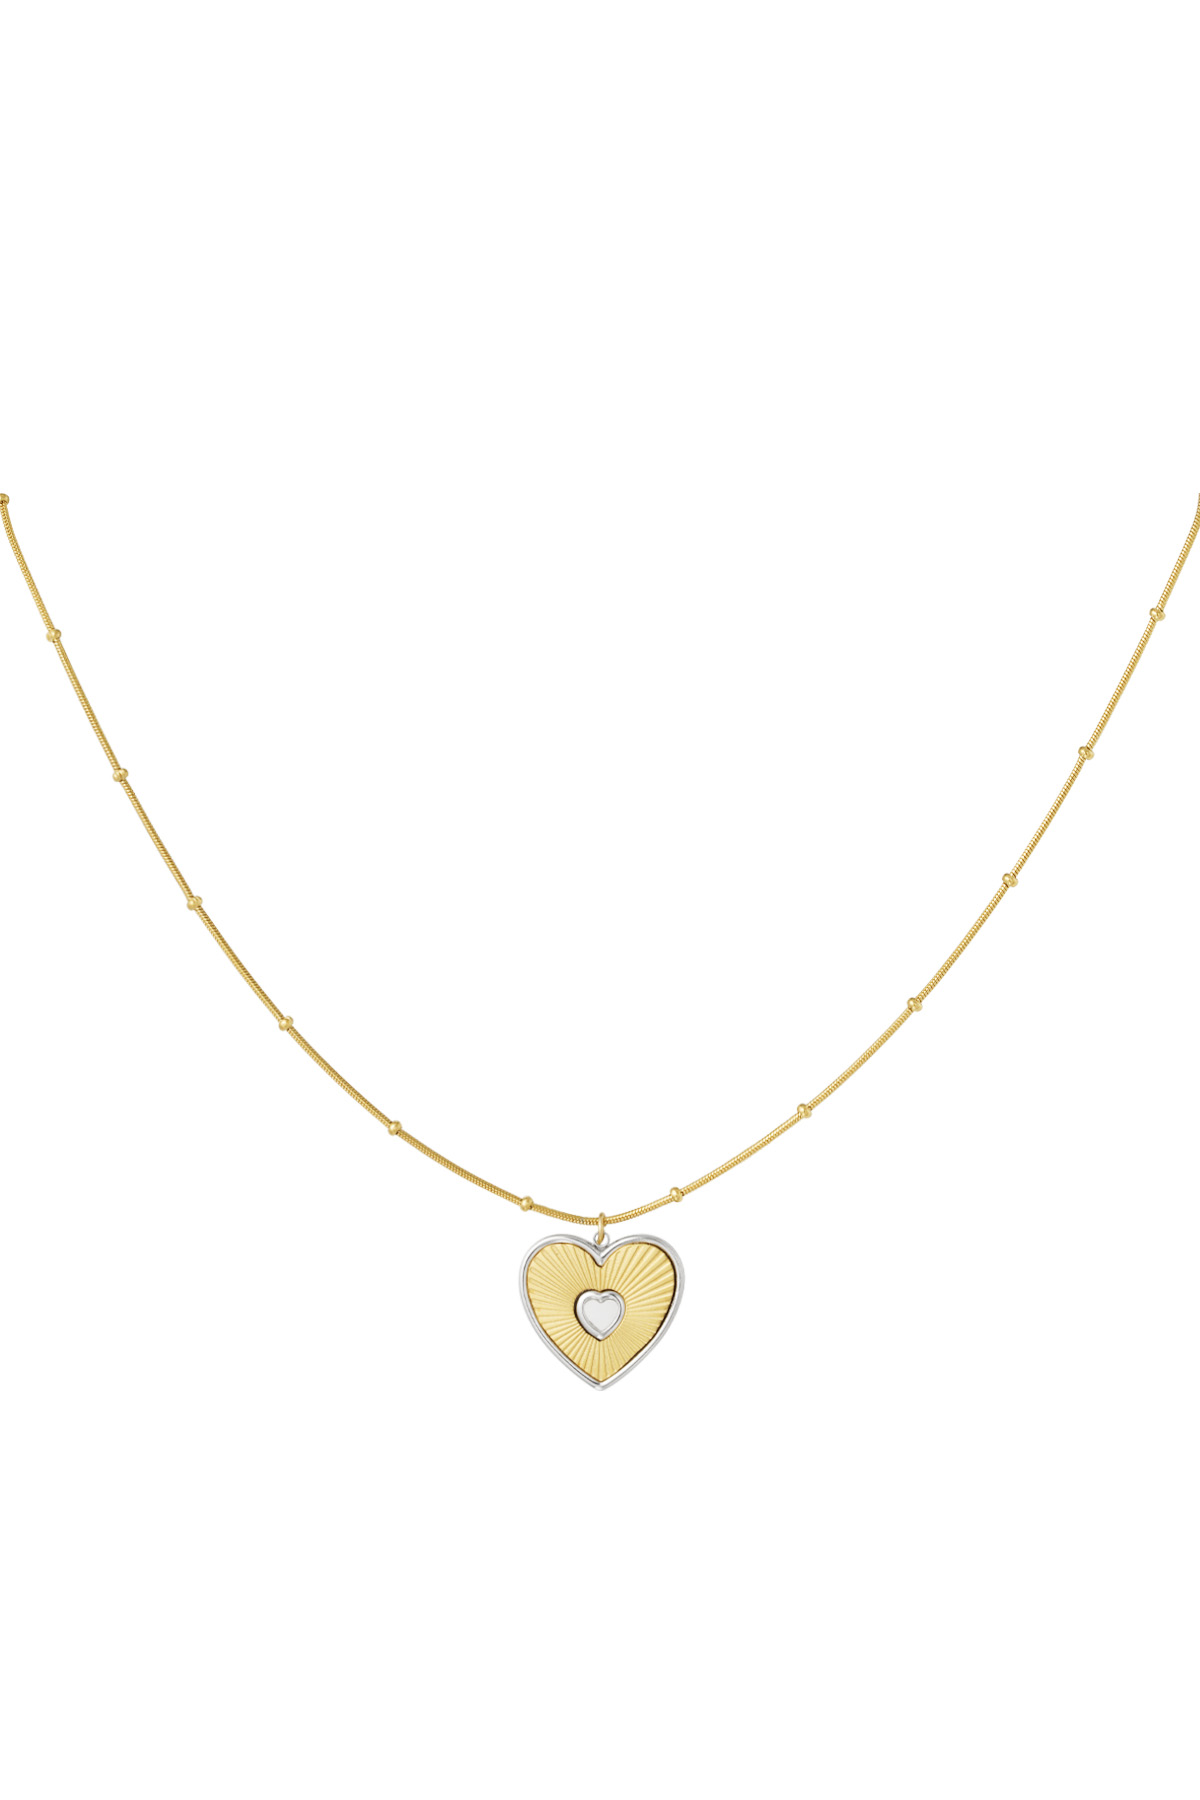 Necklace lover heart - gold